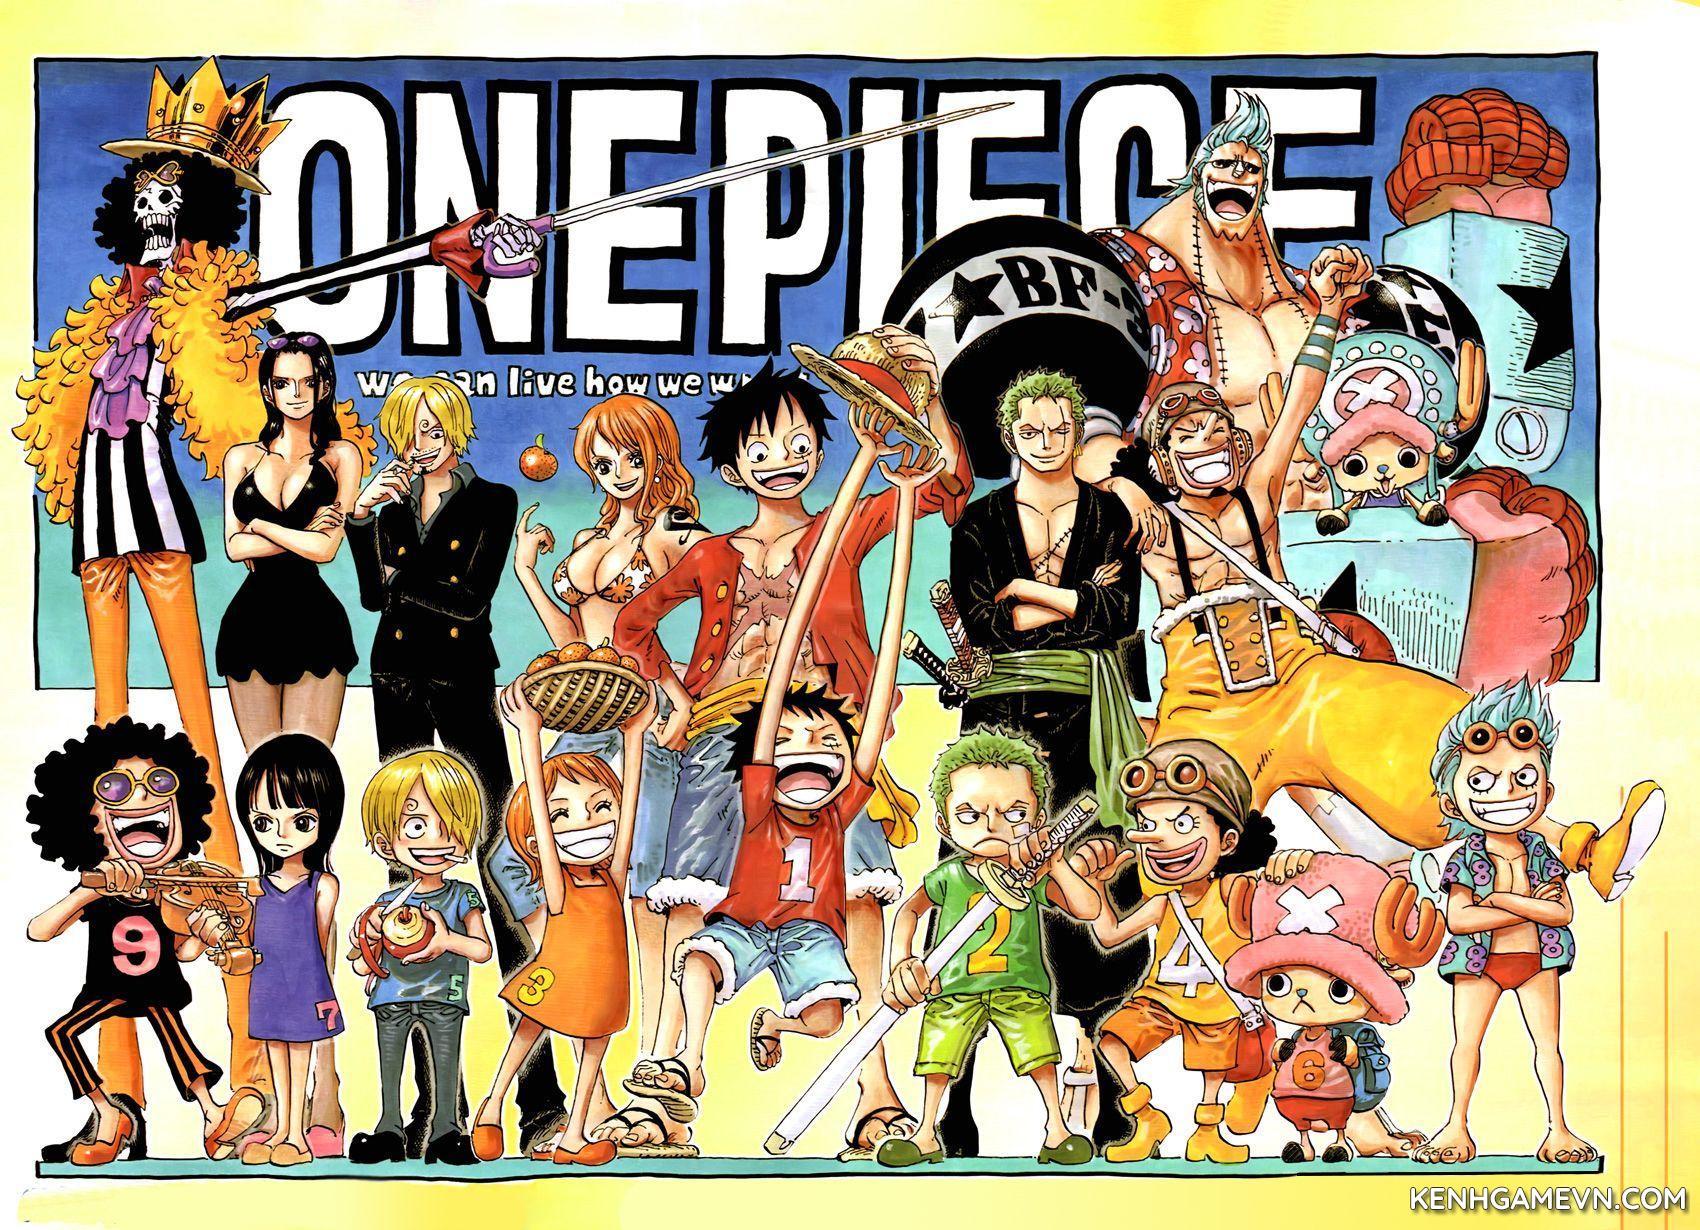 Exploring the Themes of Friendship and Dreams in One Piece